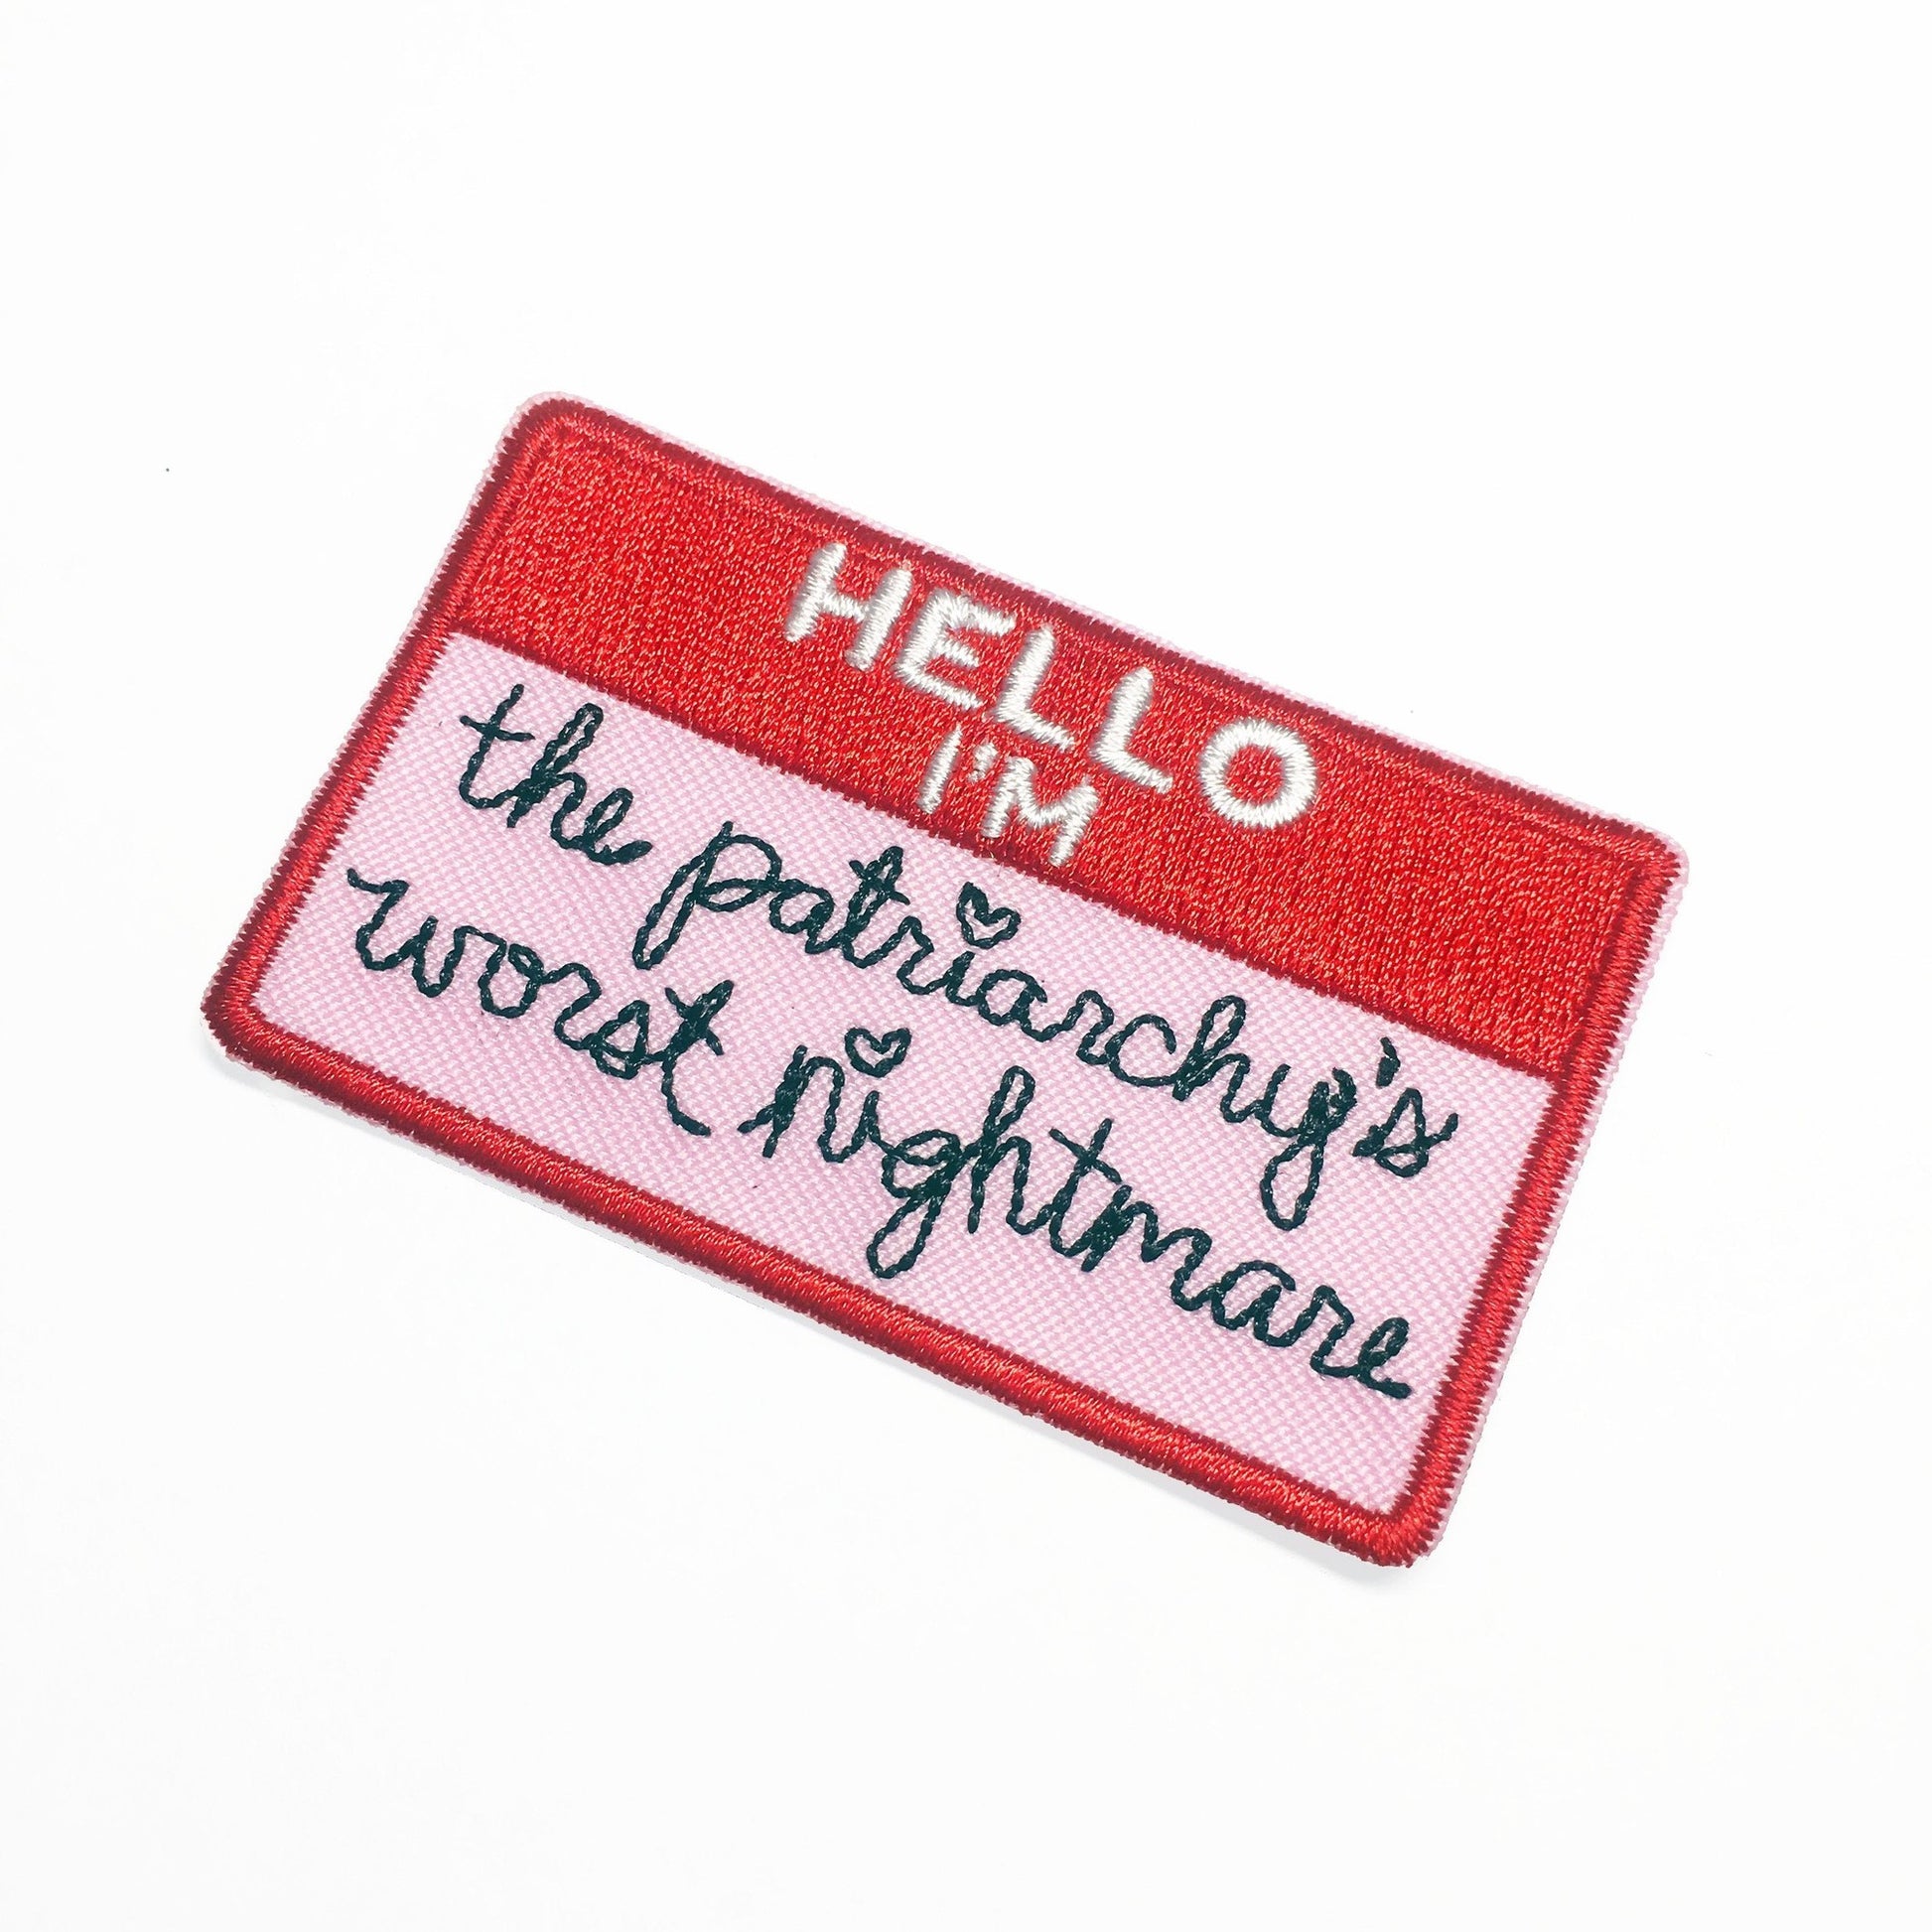 The Patriarchy's Worst Nightmare Iron-On Patch